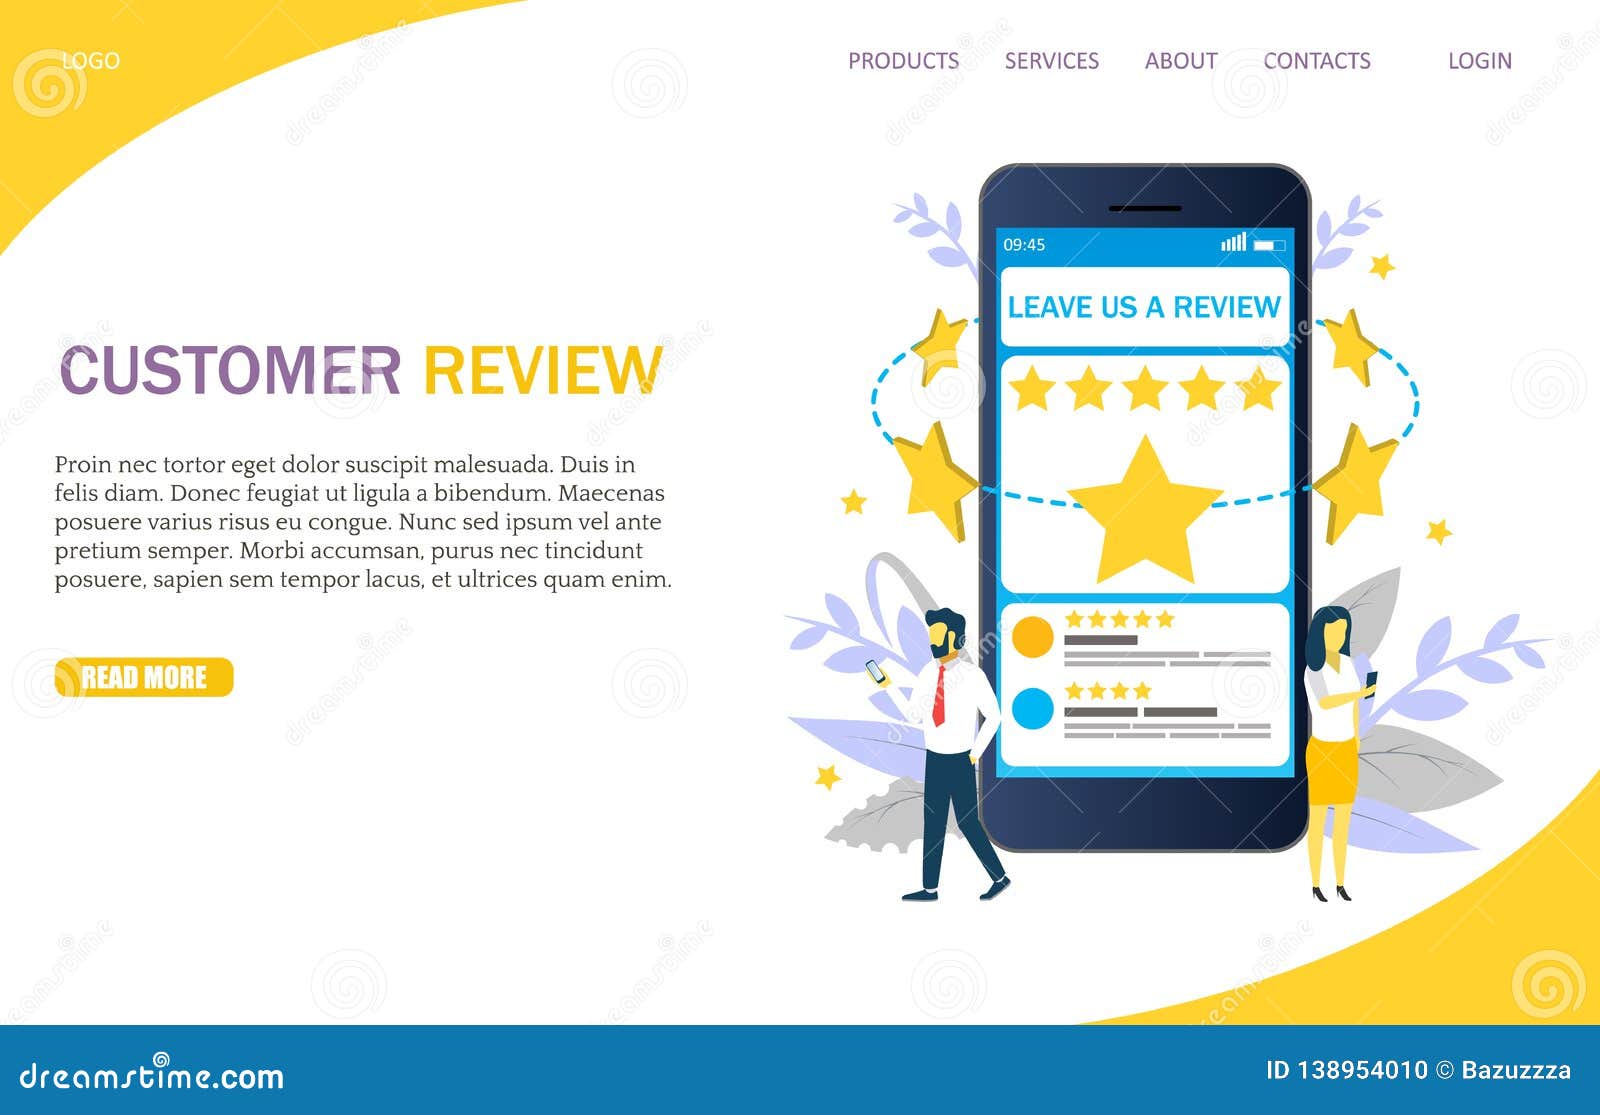 customer-review-vector-website-landing-page-design-template-stock